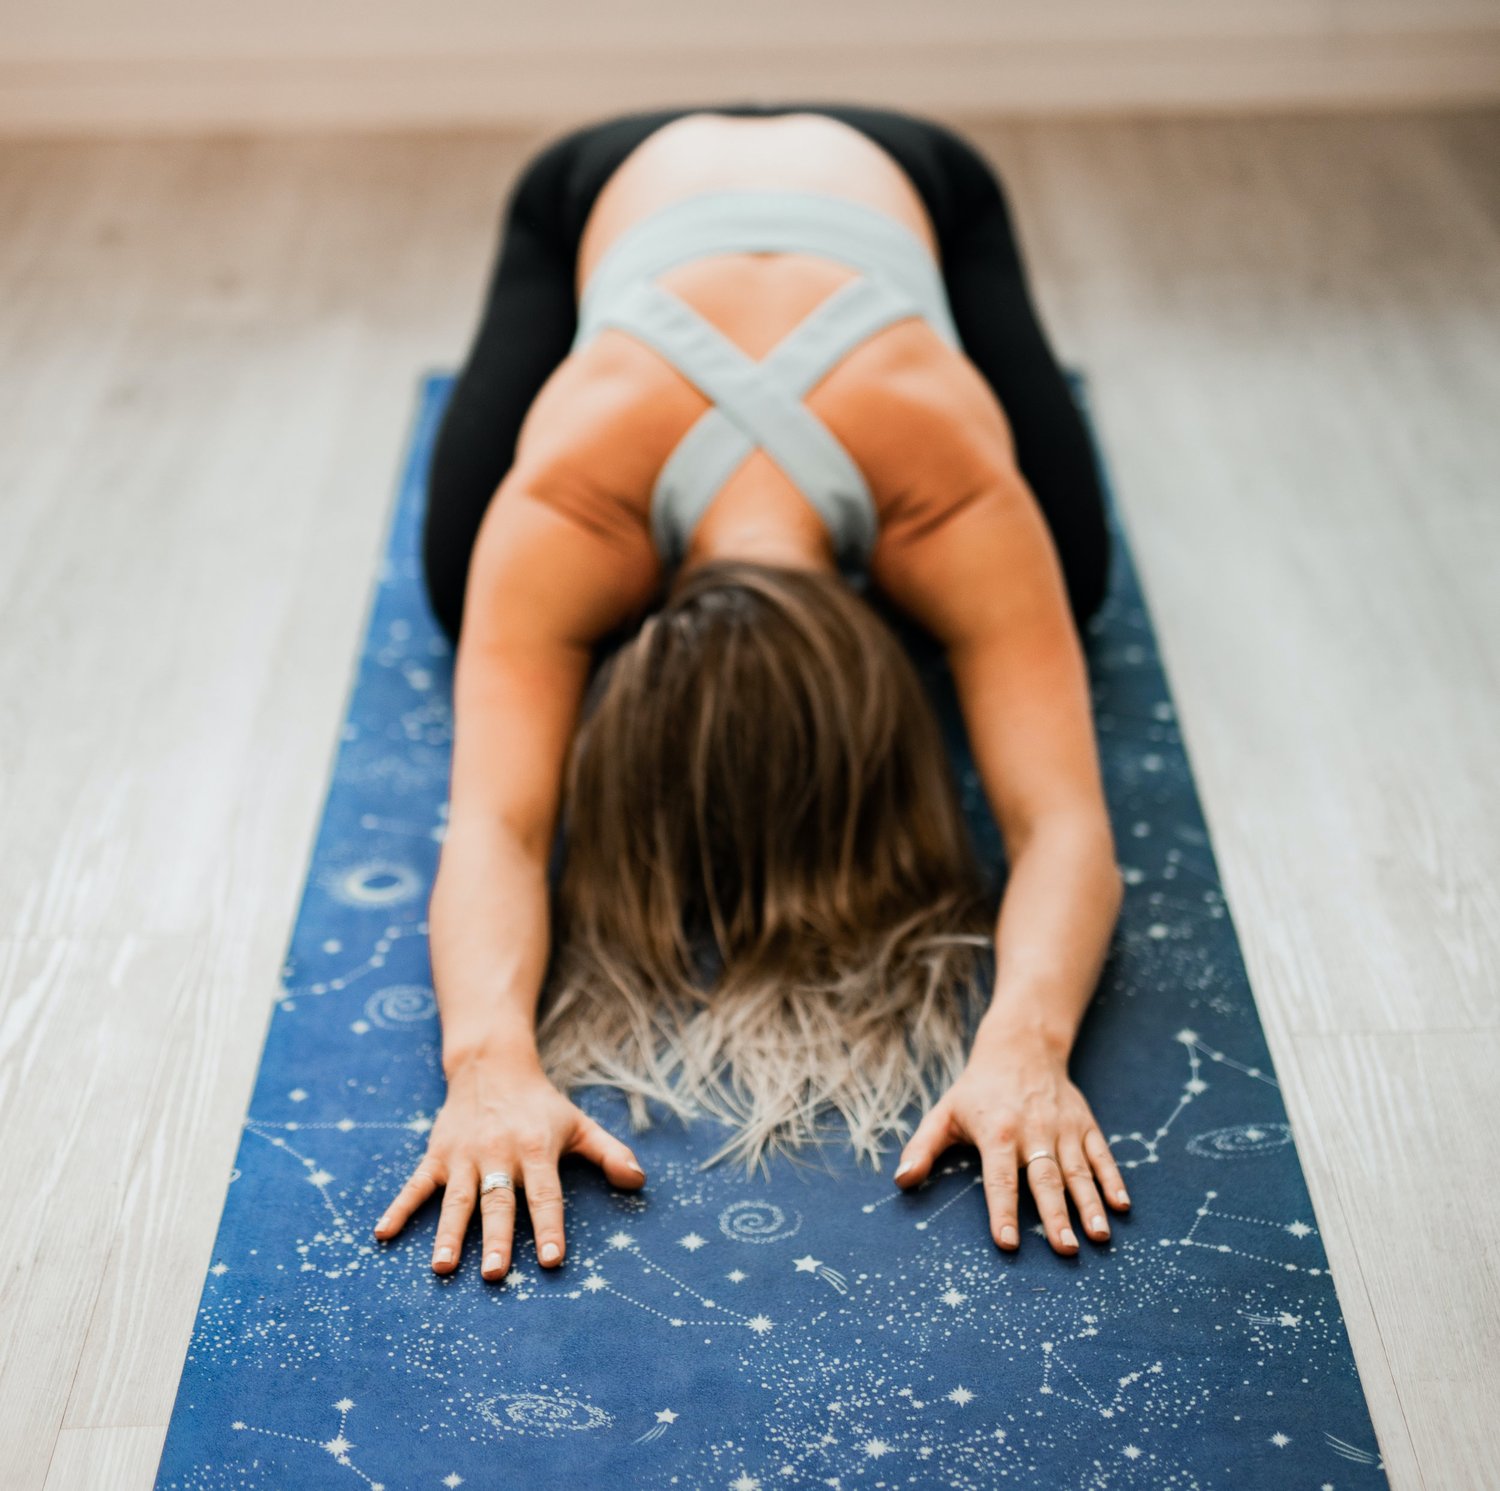 woman in childs pose on yoga mat